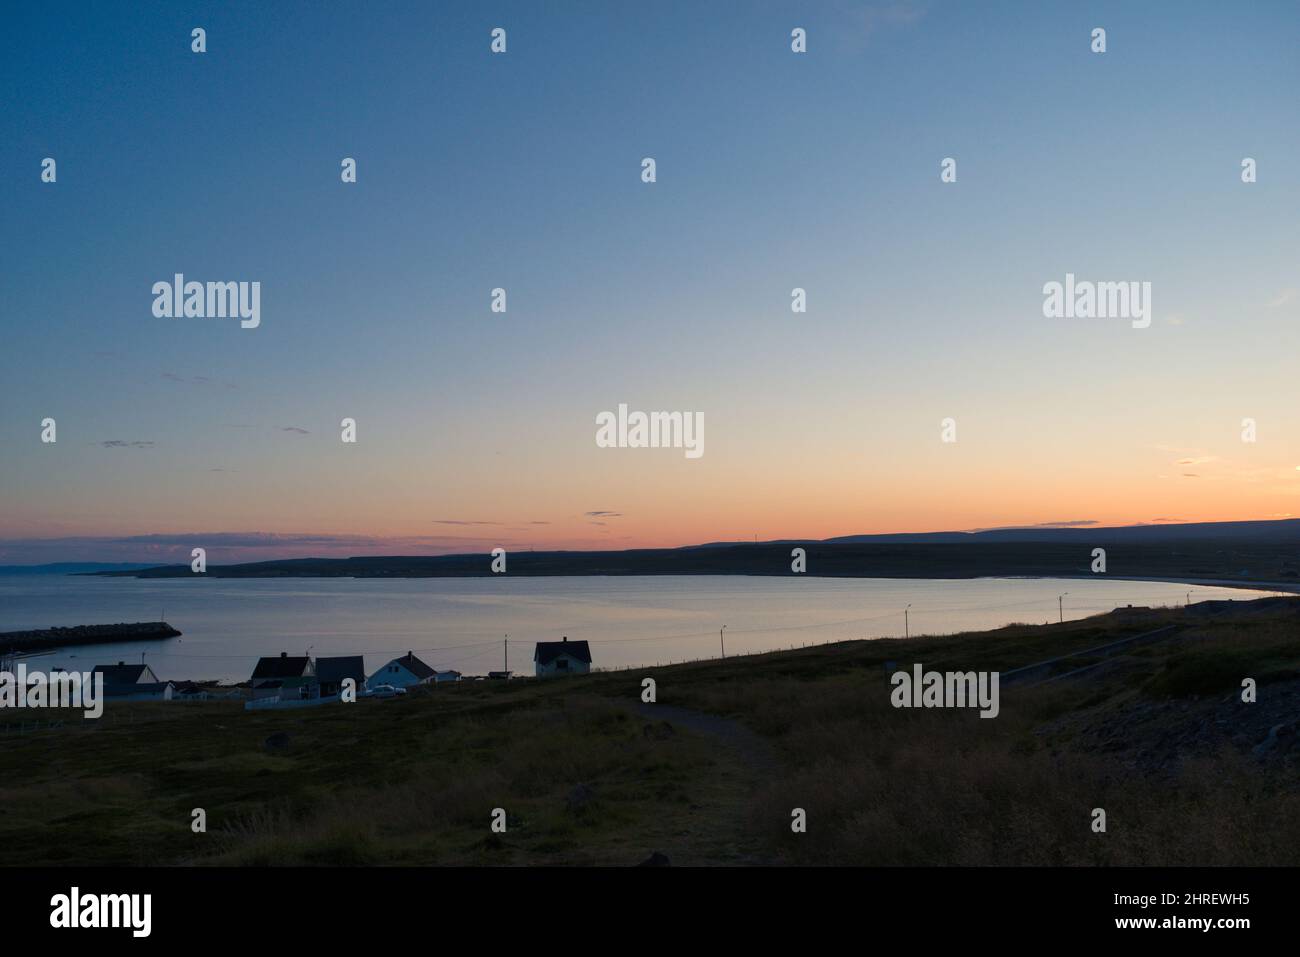 Beautiful shot of a fjord with houses in Ekkeroy, Varanger, Norway at sunset Stock Photo